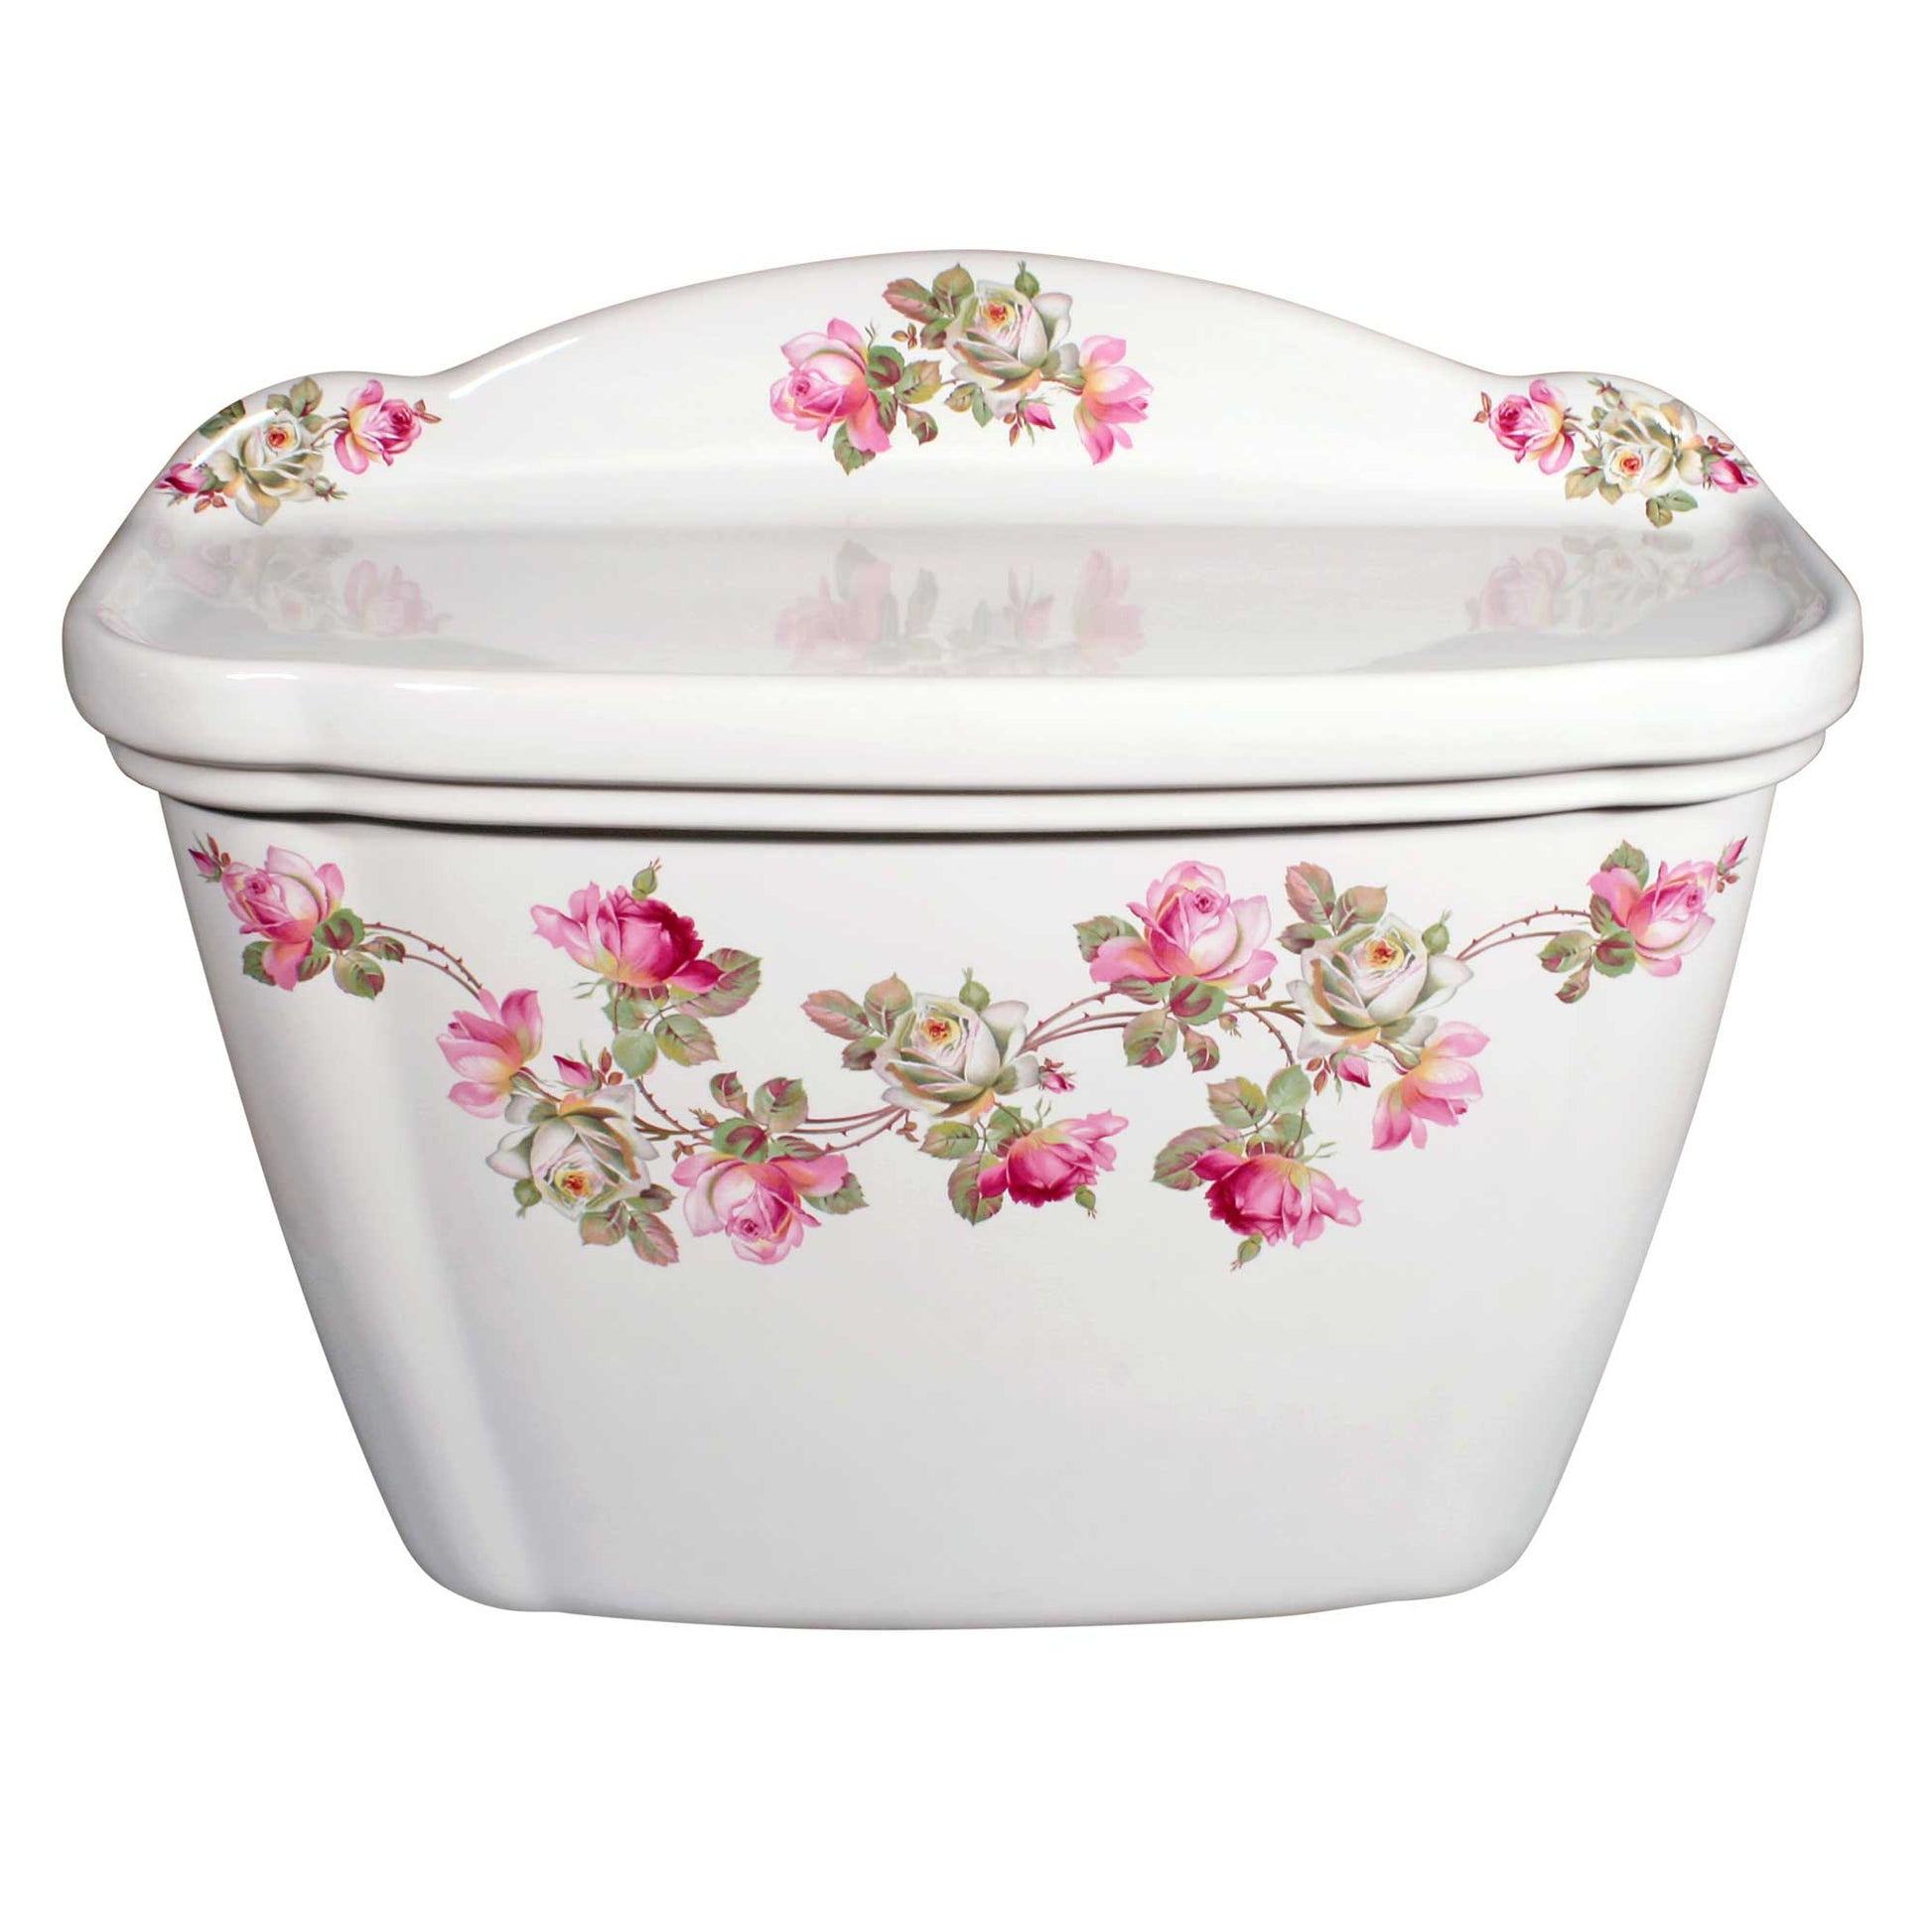 Pink and white Geraldine roses painted on toto toilet